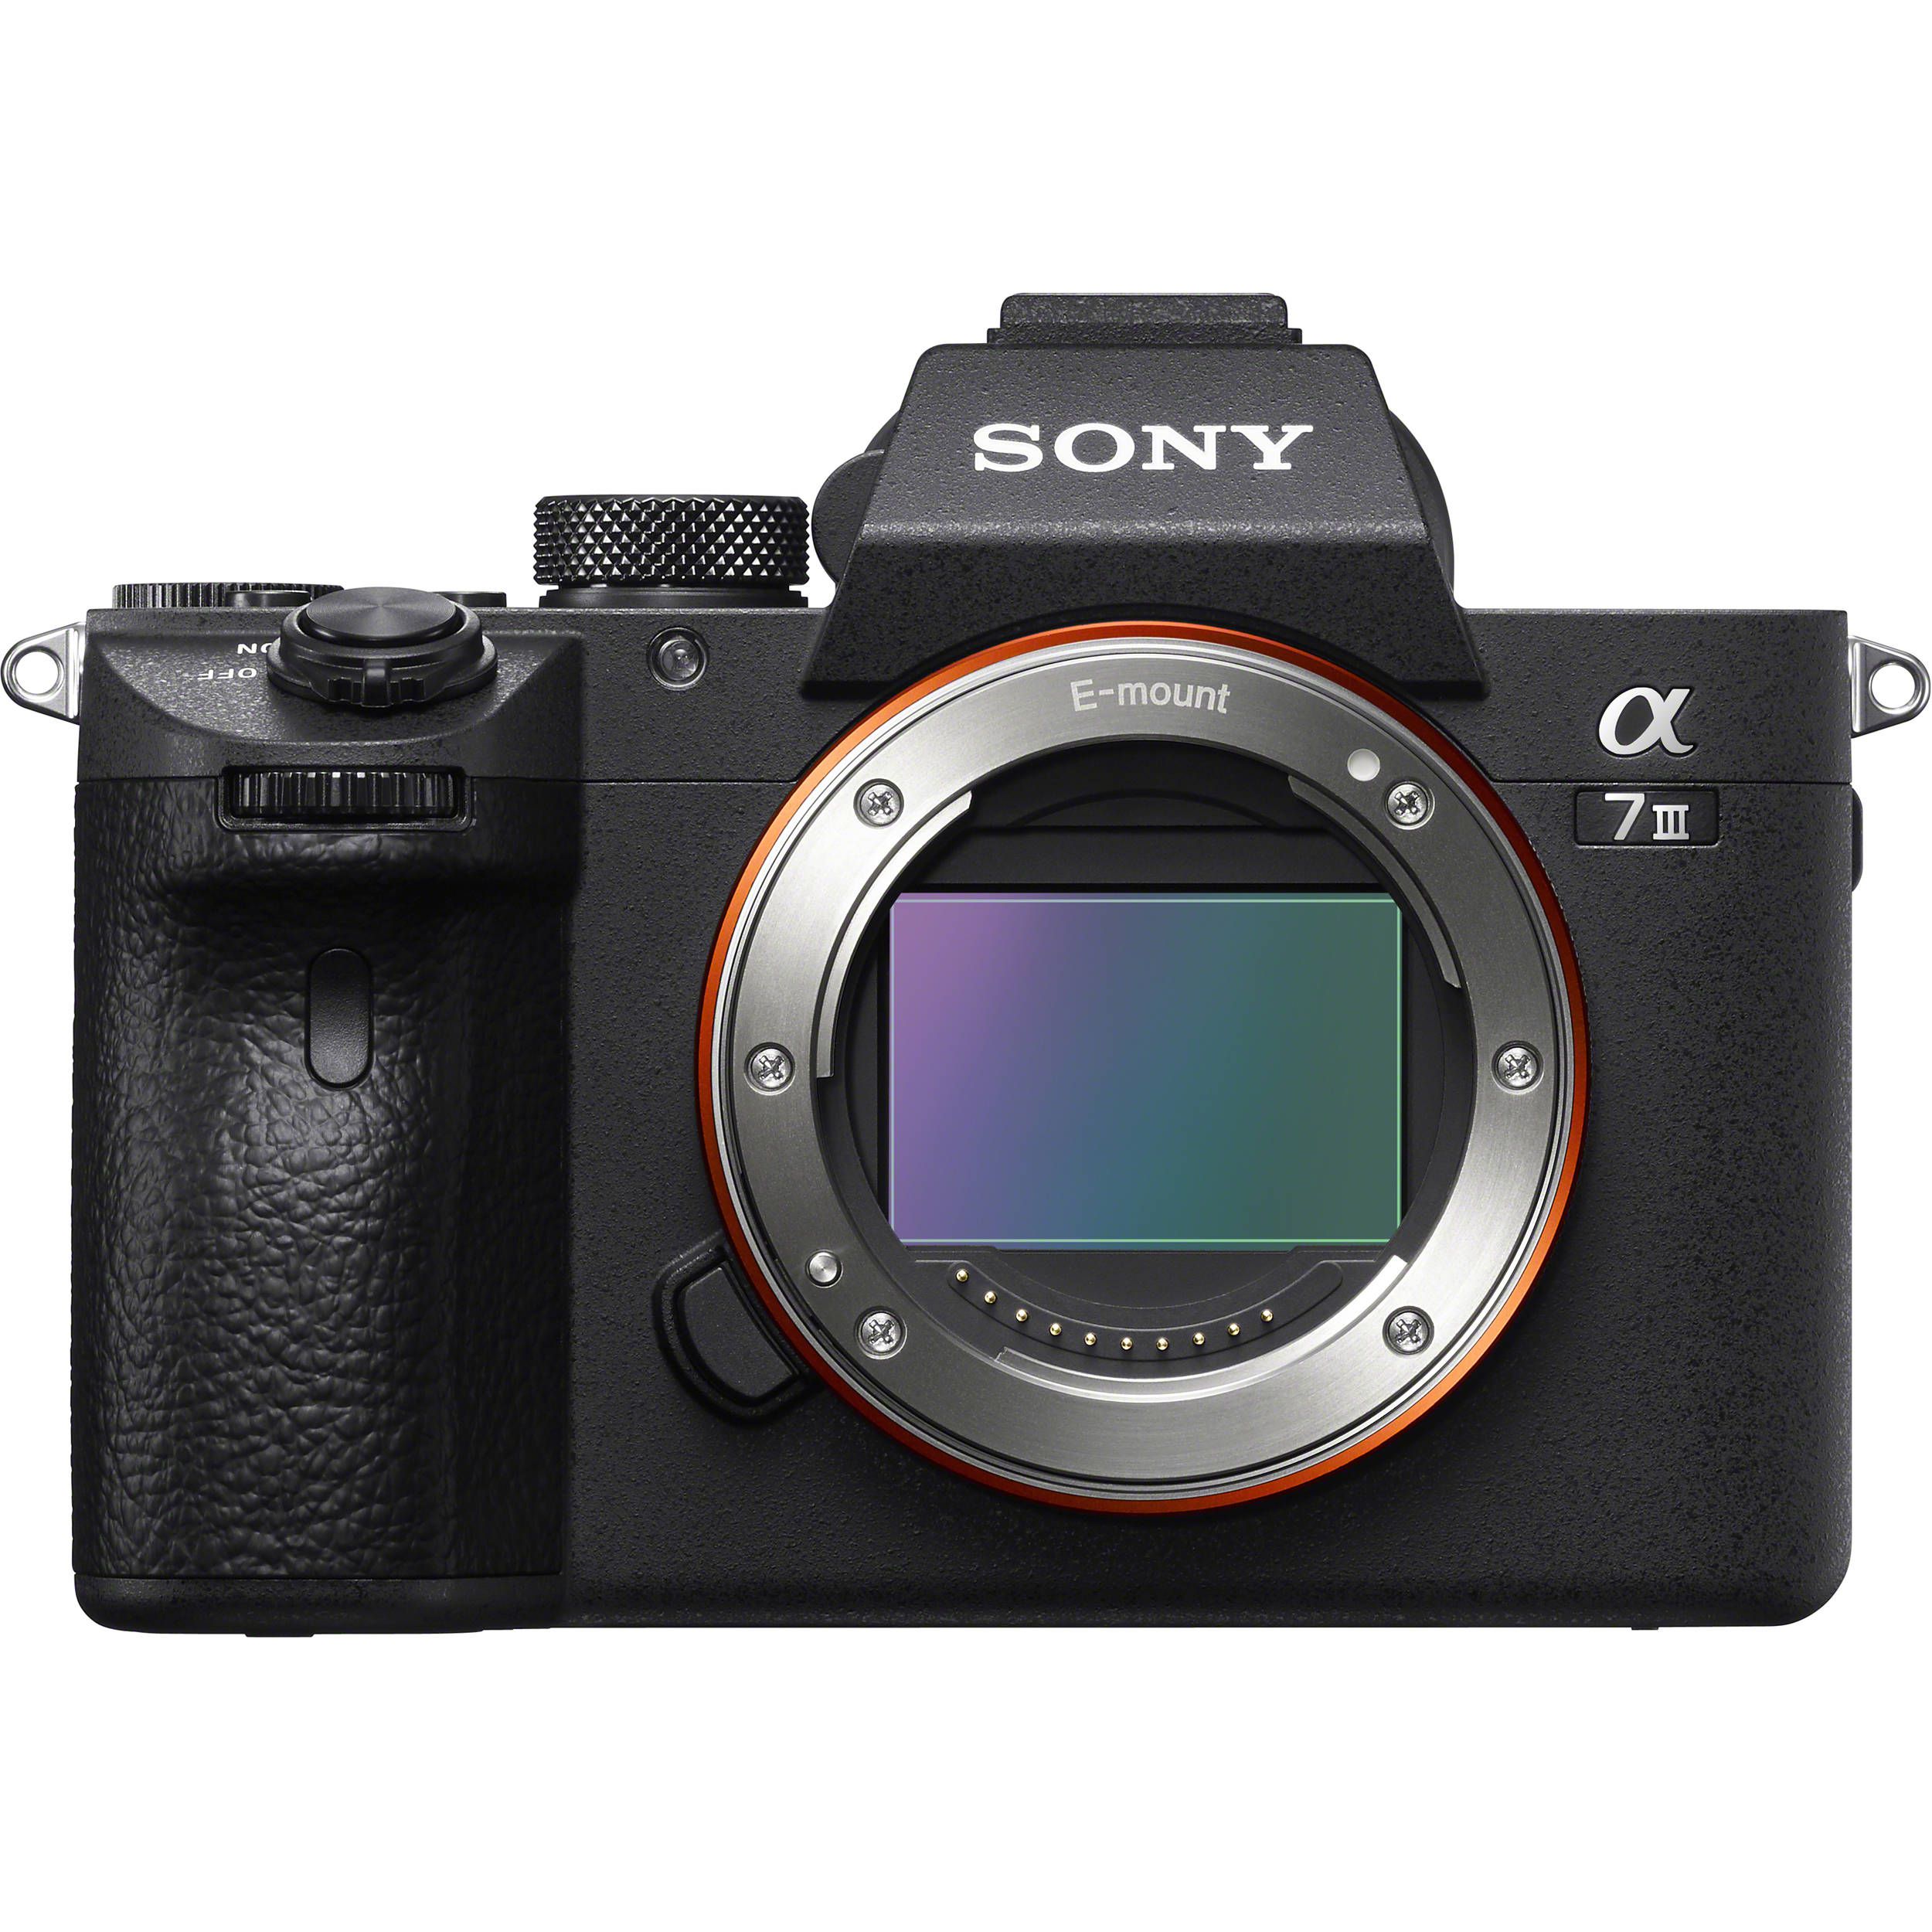 Sony a7iii Mirrorless Digital Camera! (No Credit Needed!!) As low as 39$ down today!